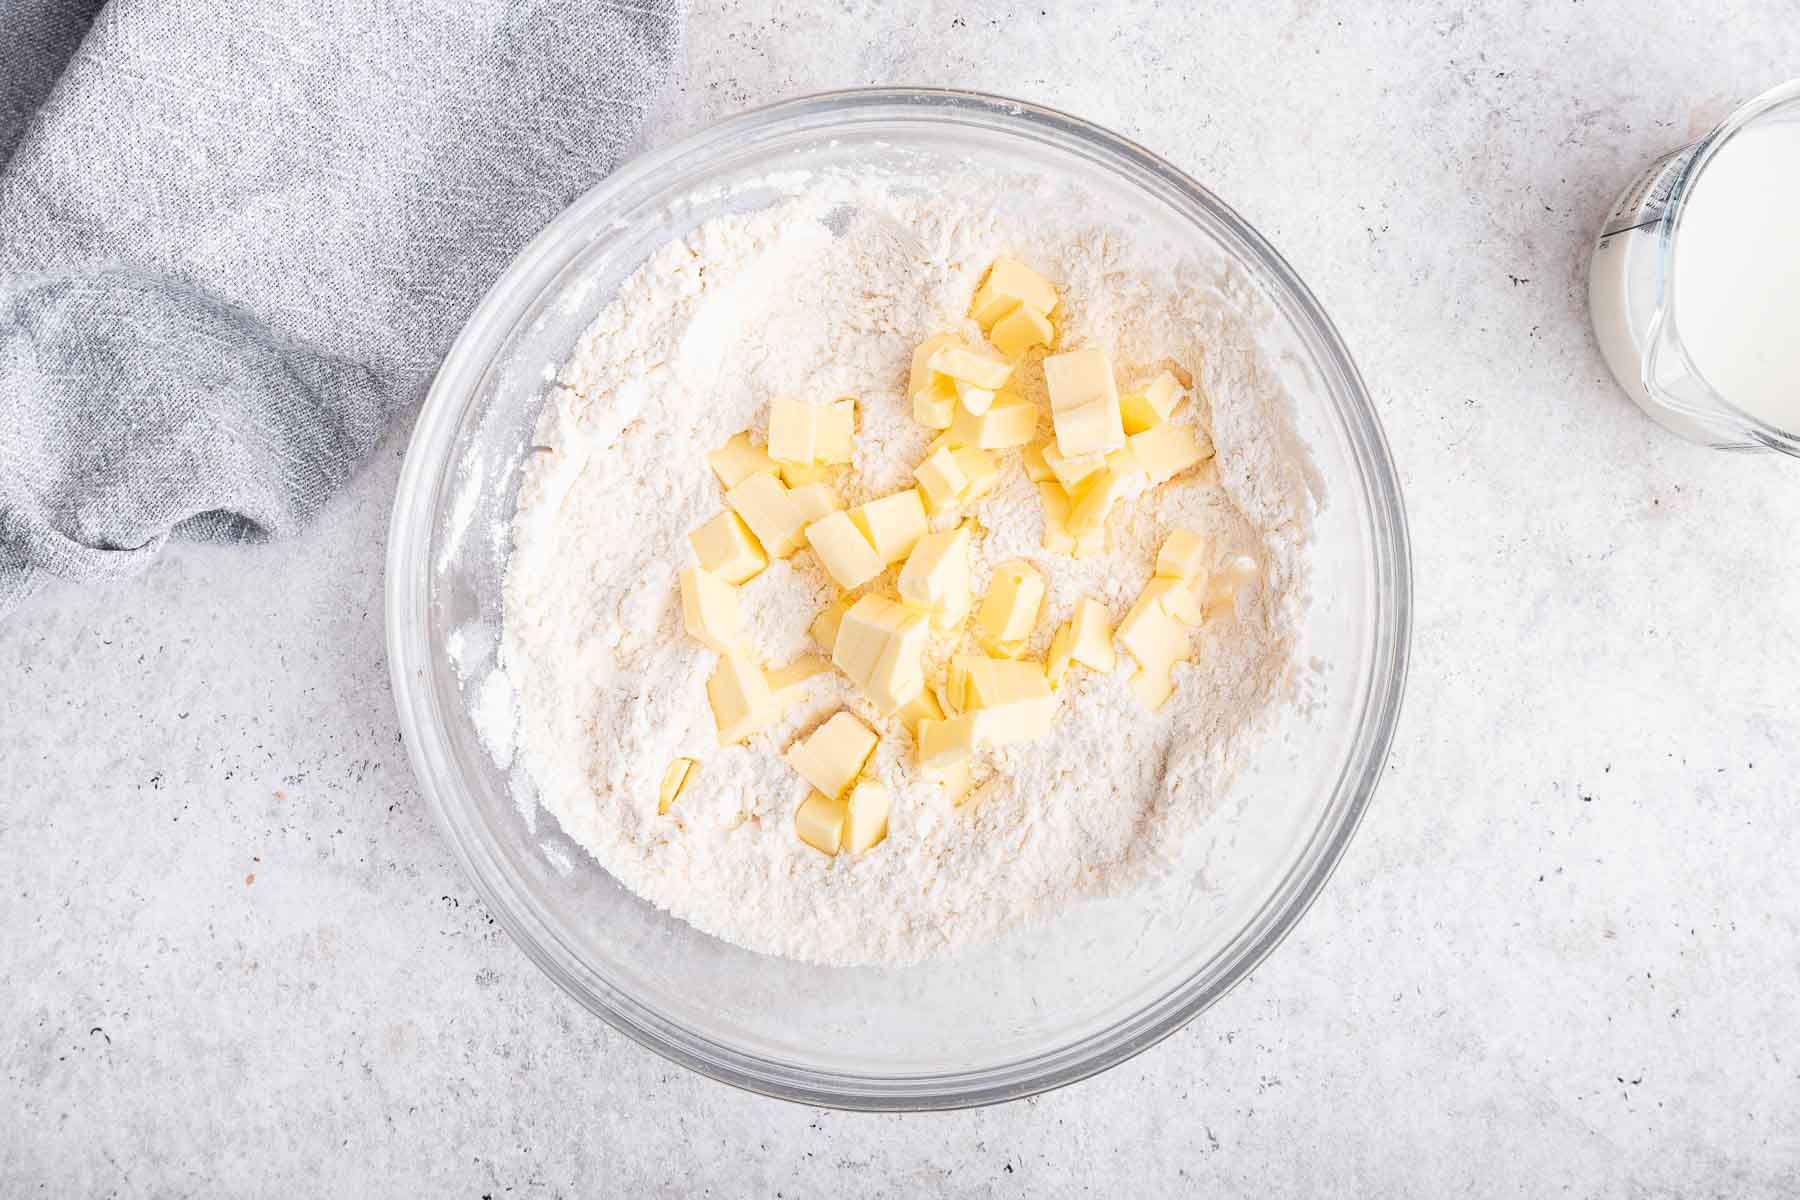 Diced butter on top of a bowl of flour.